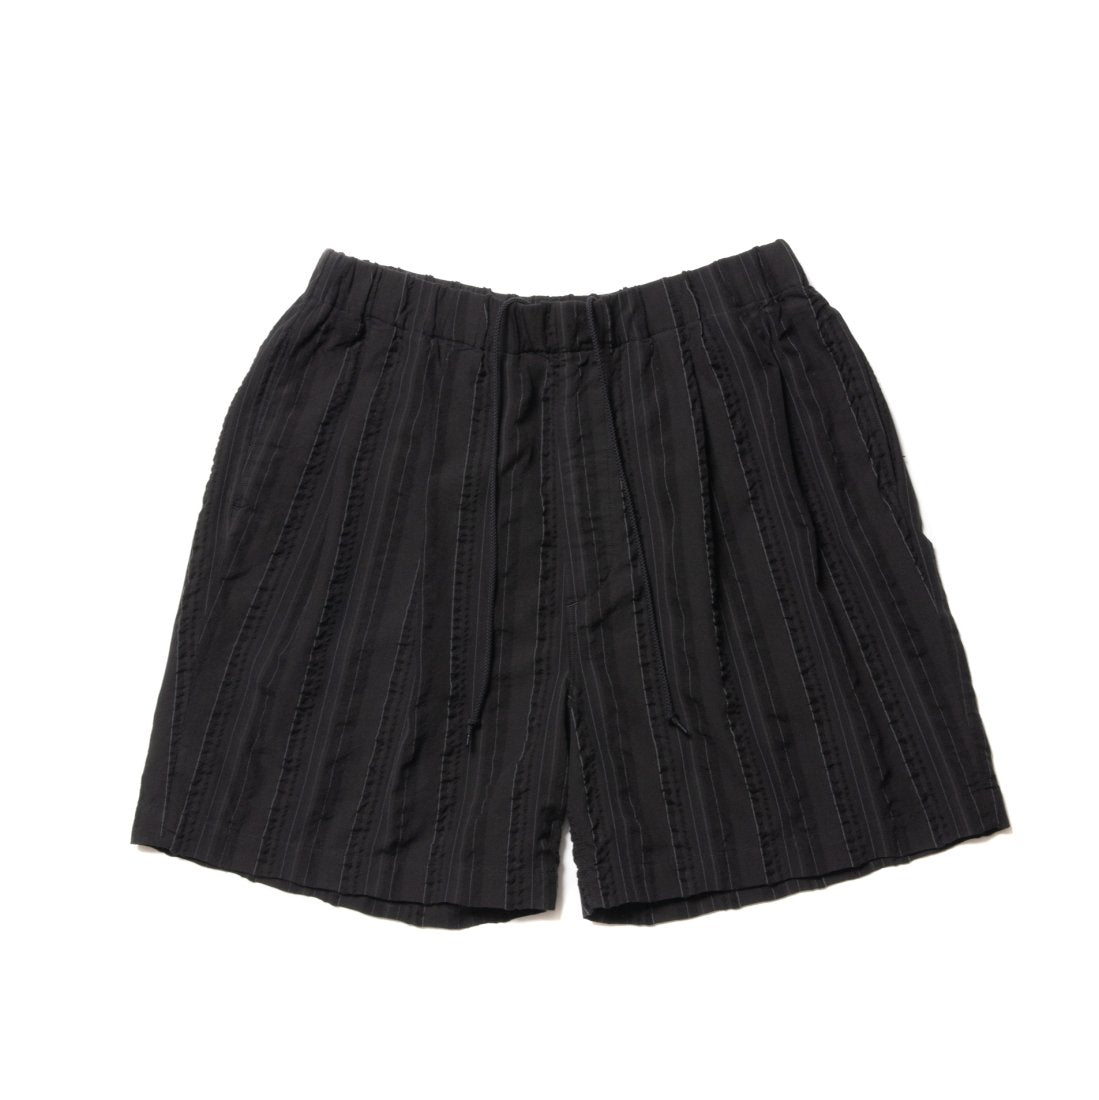 COOTIE PRODUCTIONS® / STRIPE SUCKER CLOTH 2 TUCK EASY SHORTS